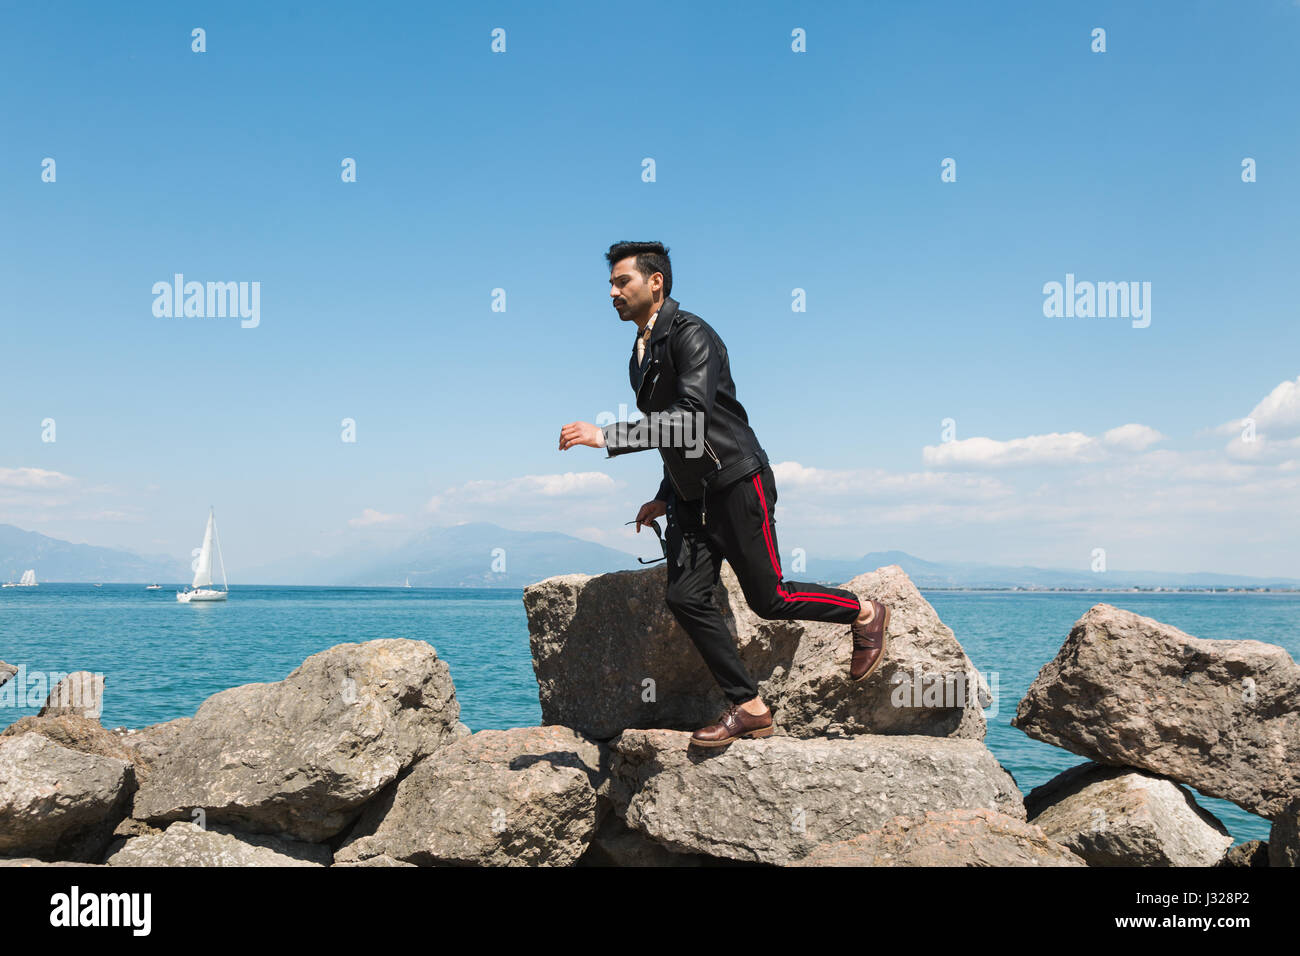 Handsome Indian man jumping in a vacation context. Street fashion and style. Stock Photo